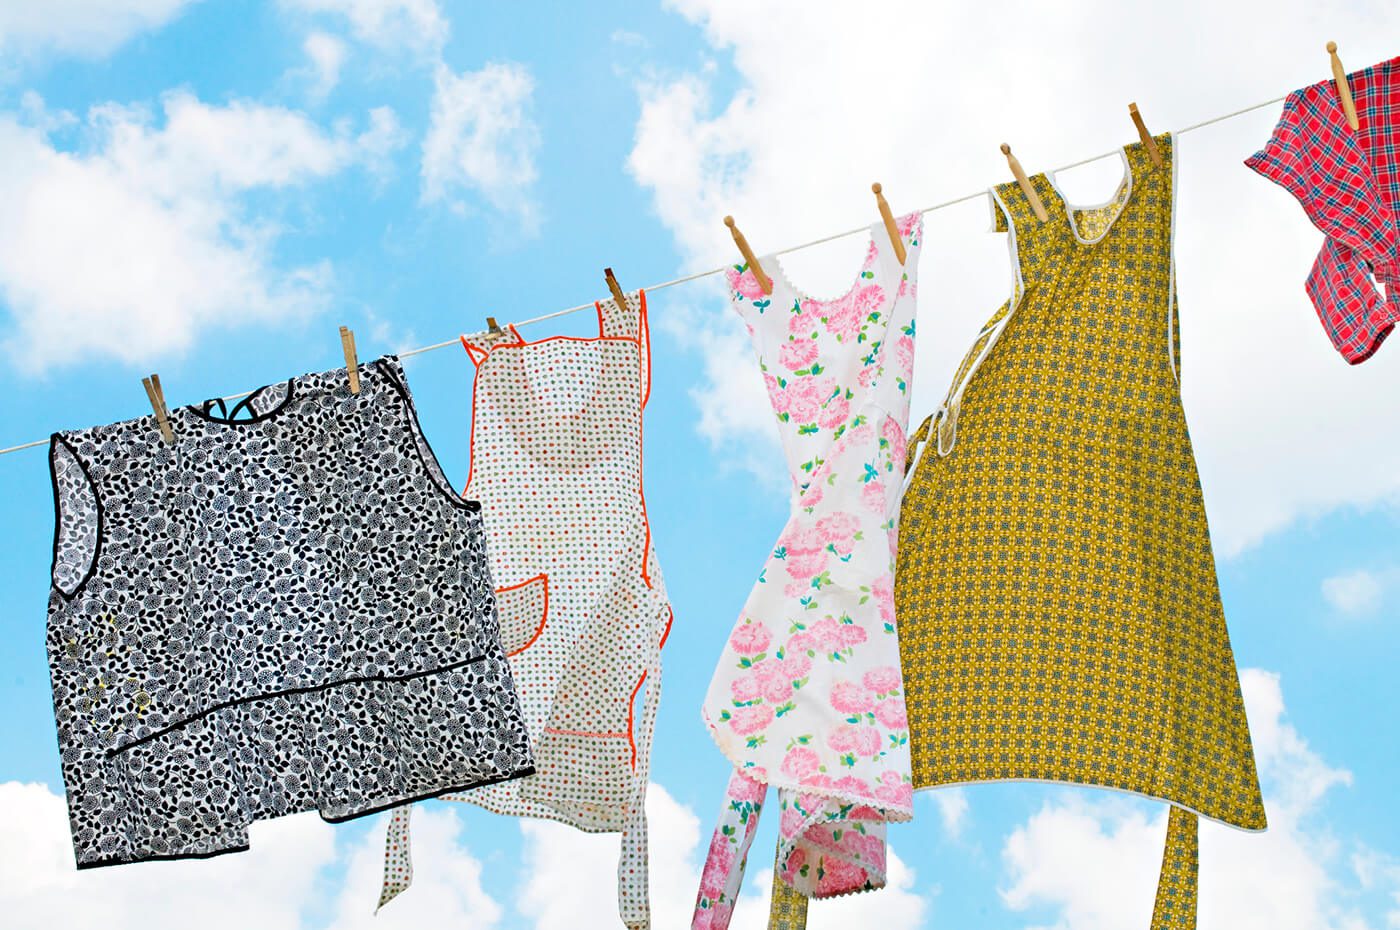 Aprons hanging on clothes line